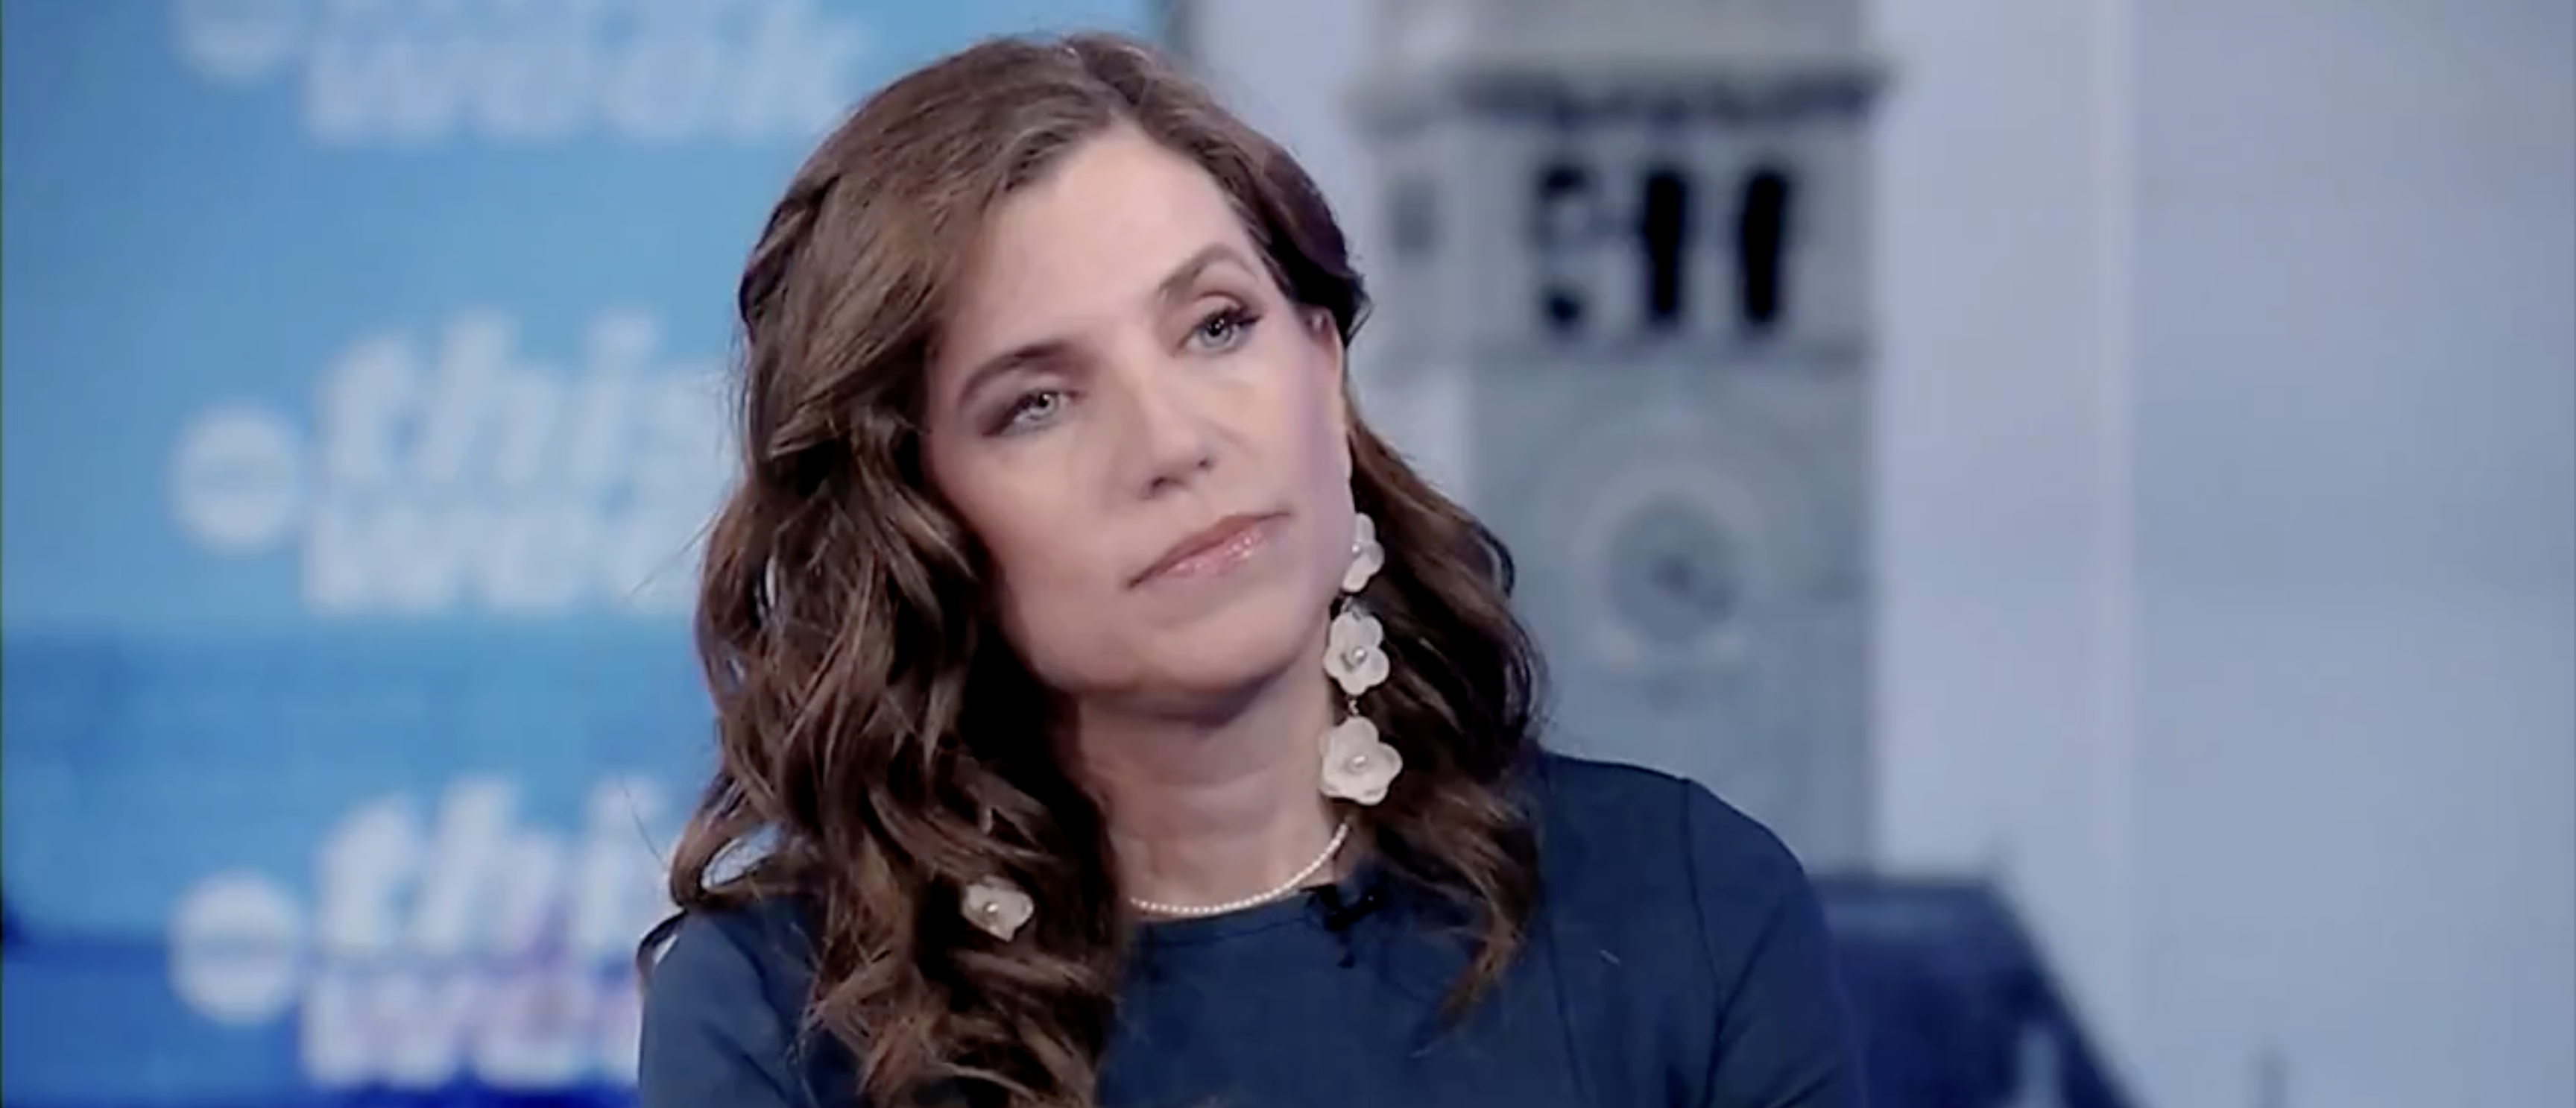 ‘You Are Shaming Me’: Nancy Mace Has Tense Exchange With ABC Host Over Her Political Choices As Rape Victim